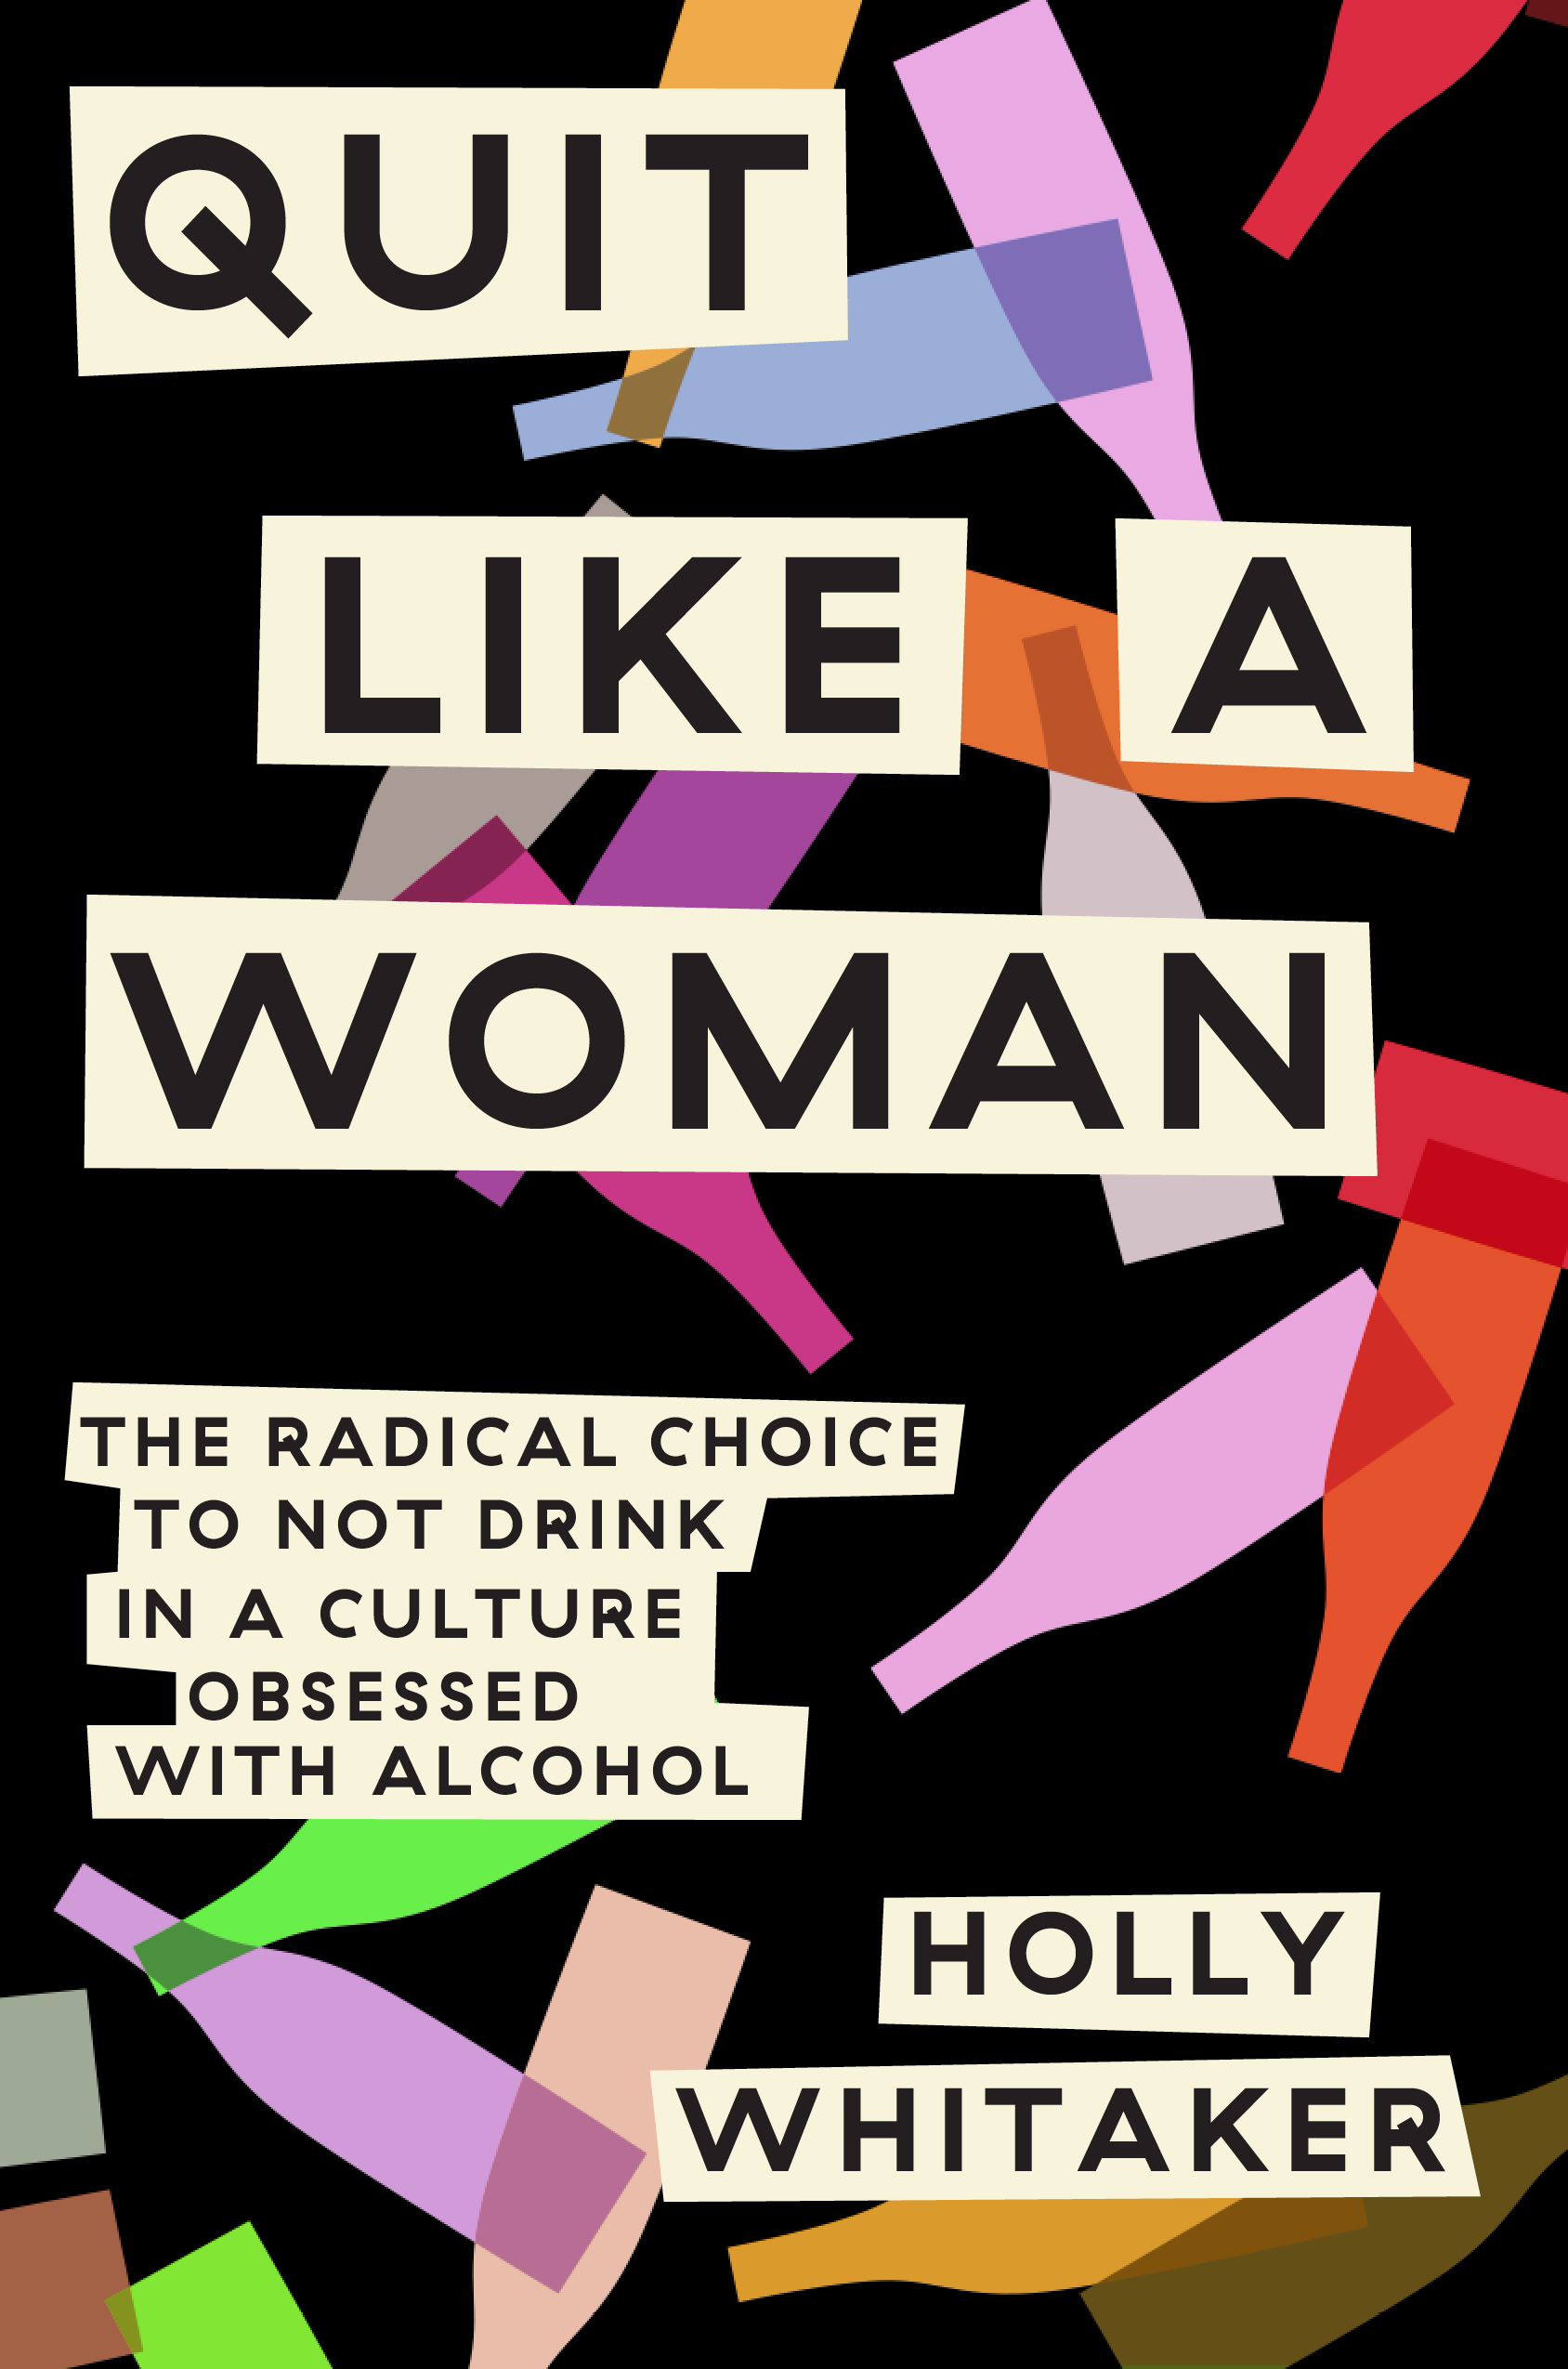 'Quit Like a Woman' by Holly Whitaker